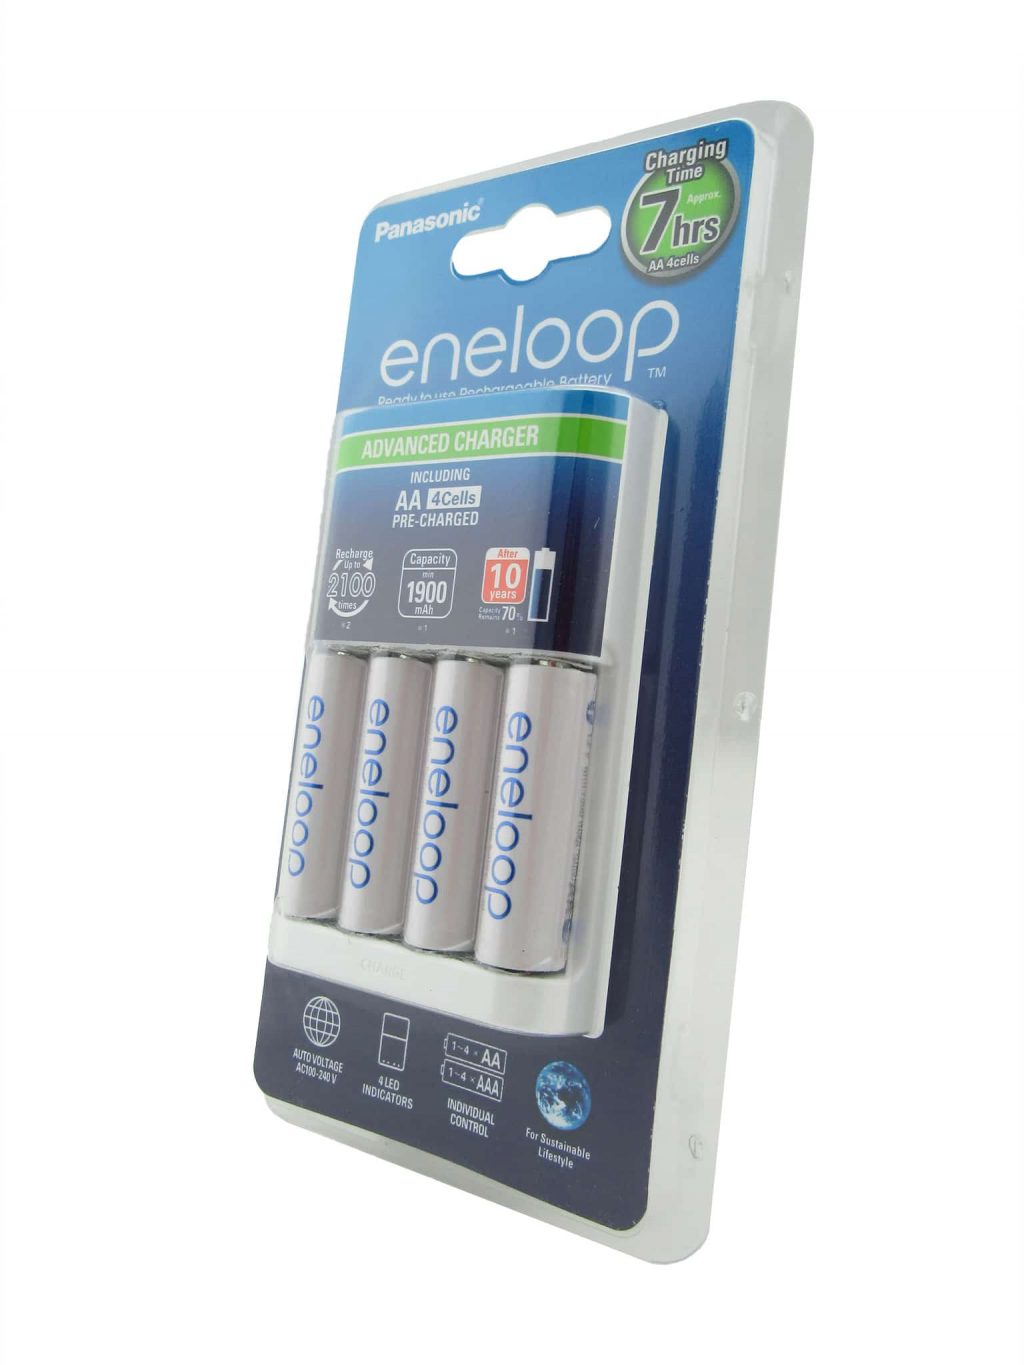 Eneloop charger including AA-size rechargeable batteries